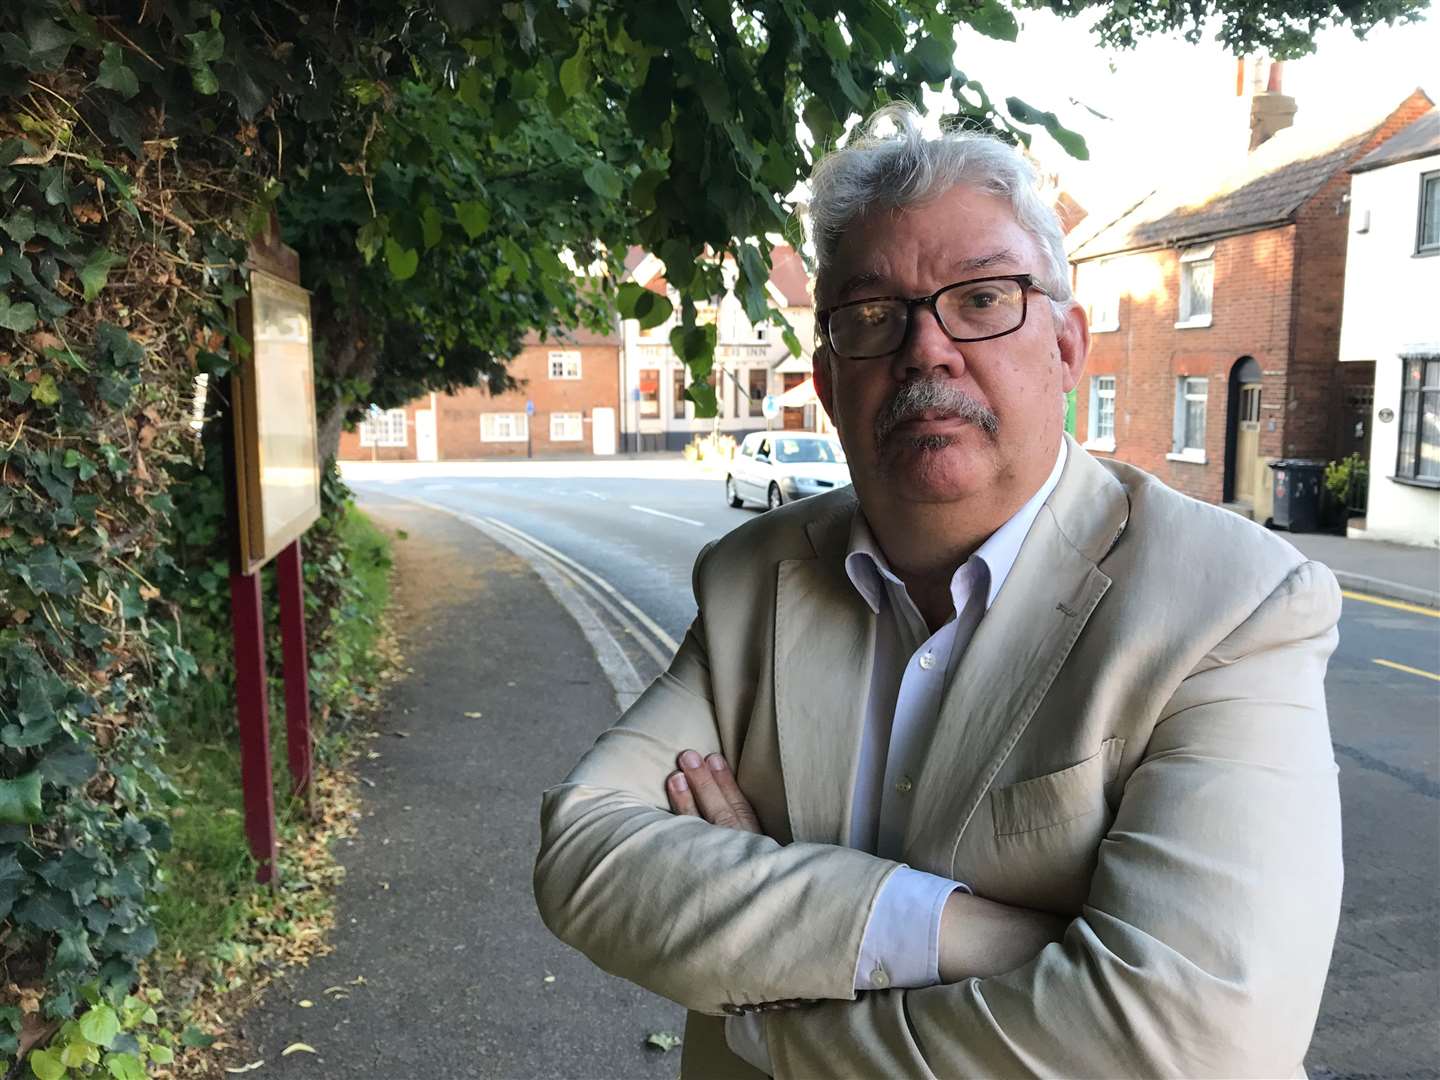 Herne villager Alistair Russell believes the roadworks could make journeys into Canterbury three times longer